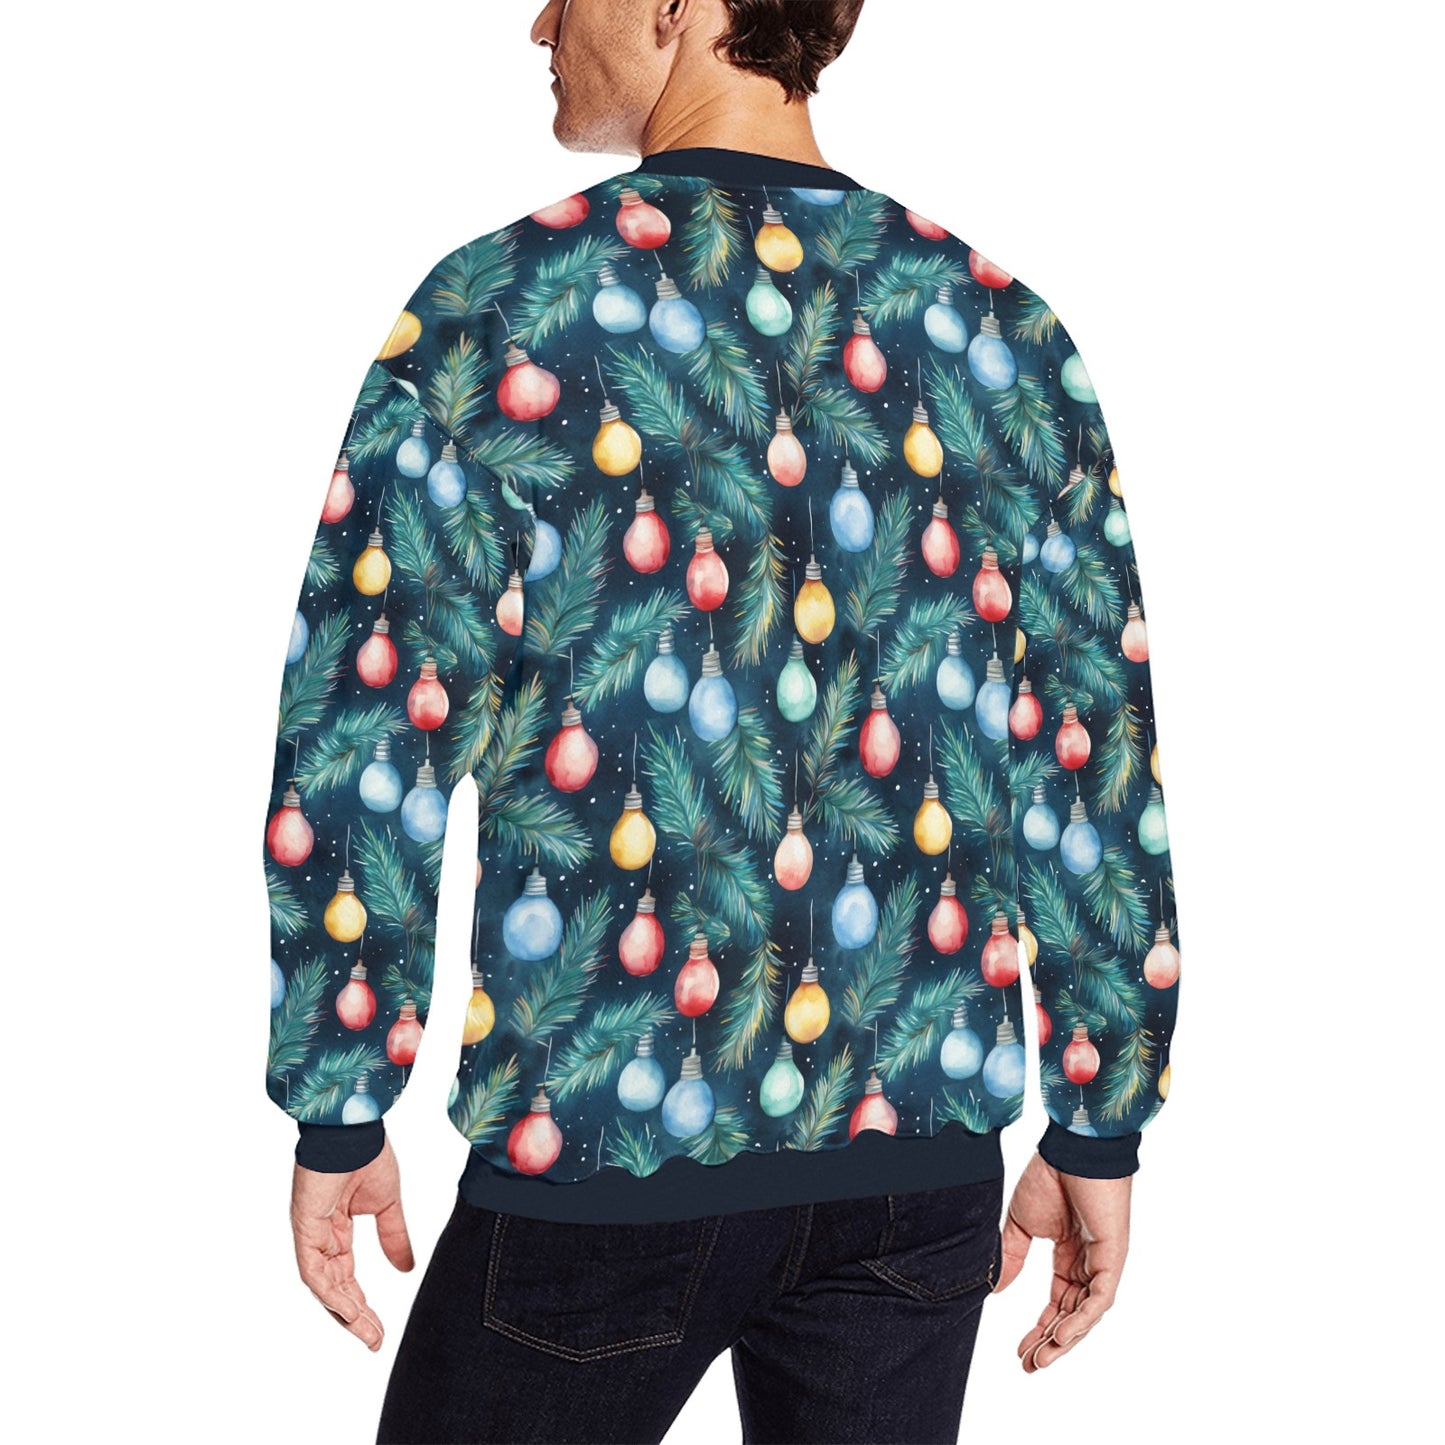 Christmas Lights Ugly Sweater, Bad Xmas Print Unisex Women Men Tacky Vintage Party Winter Holiday Plus Size Sweatshirt Jumper Party